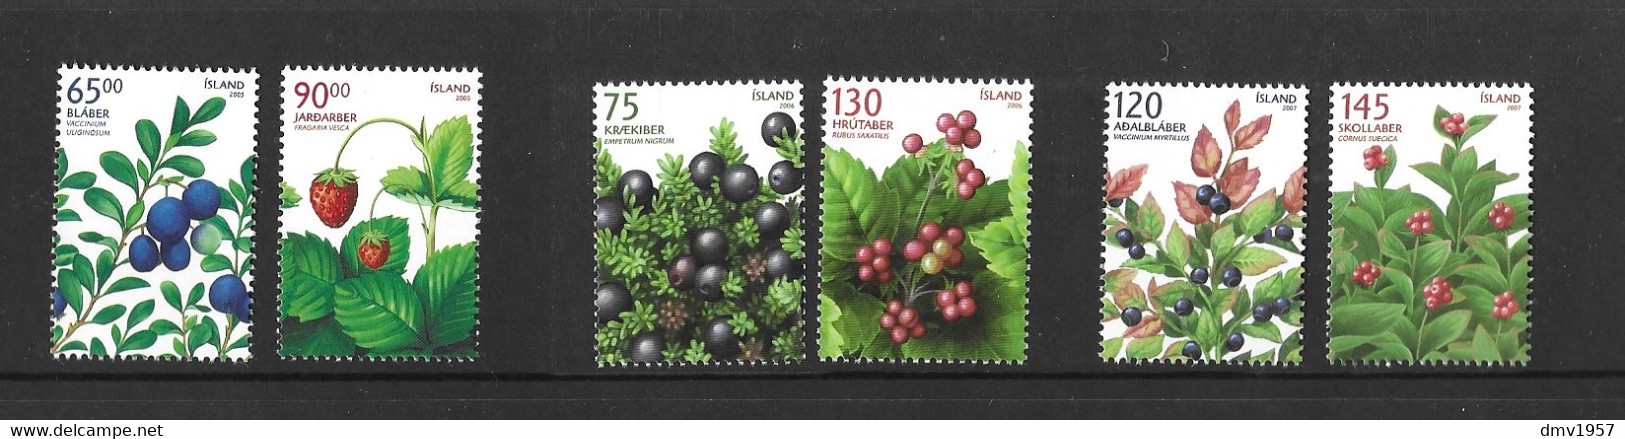 Iceland 2005/7 MNH Berries - Booklets